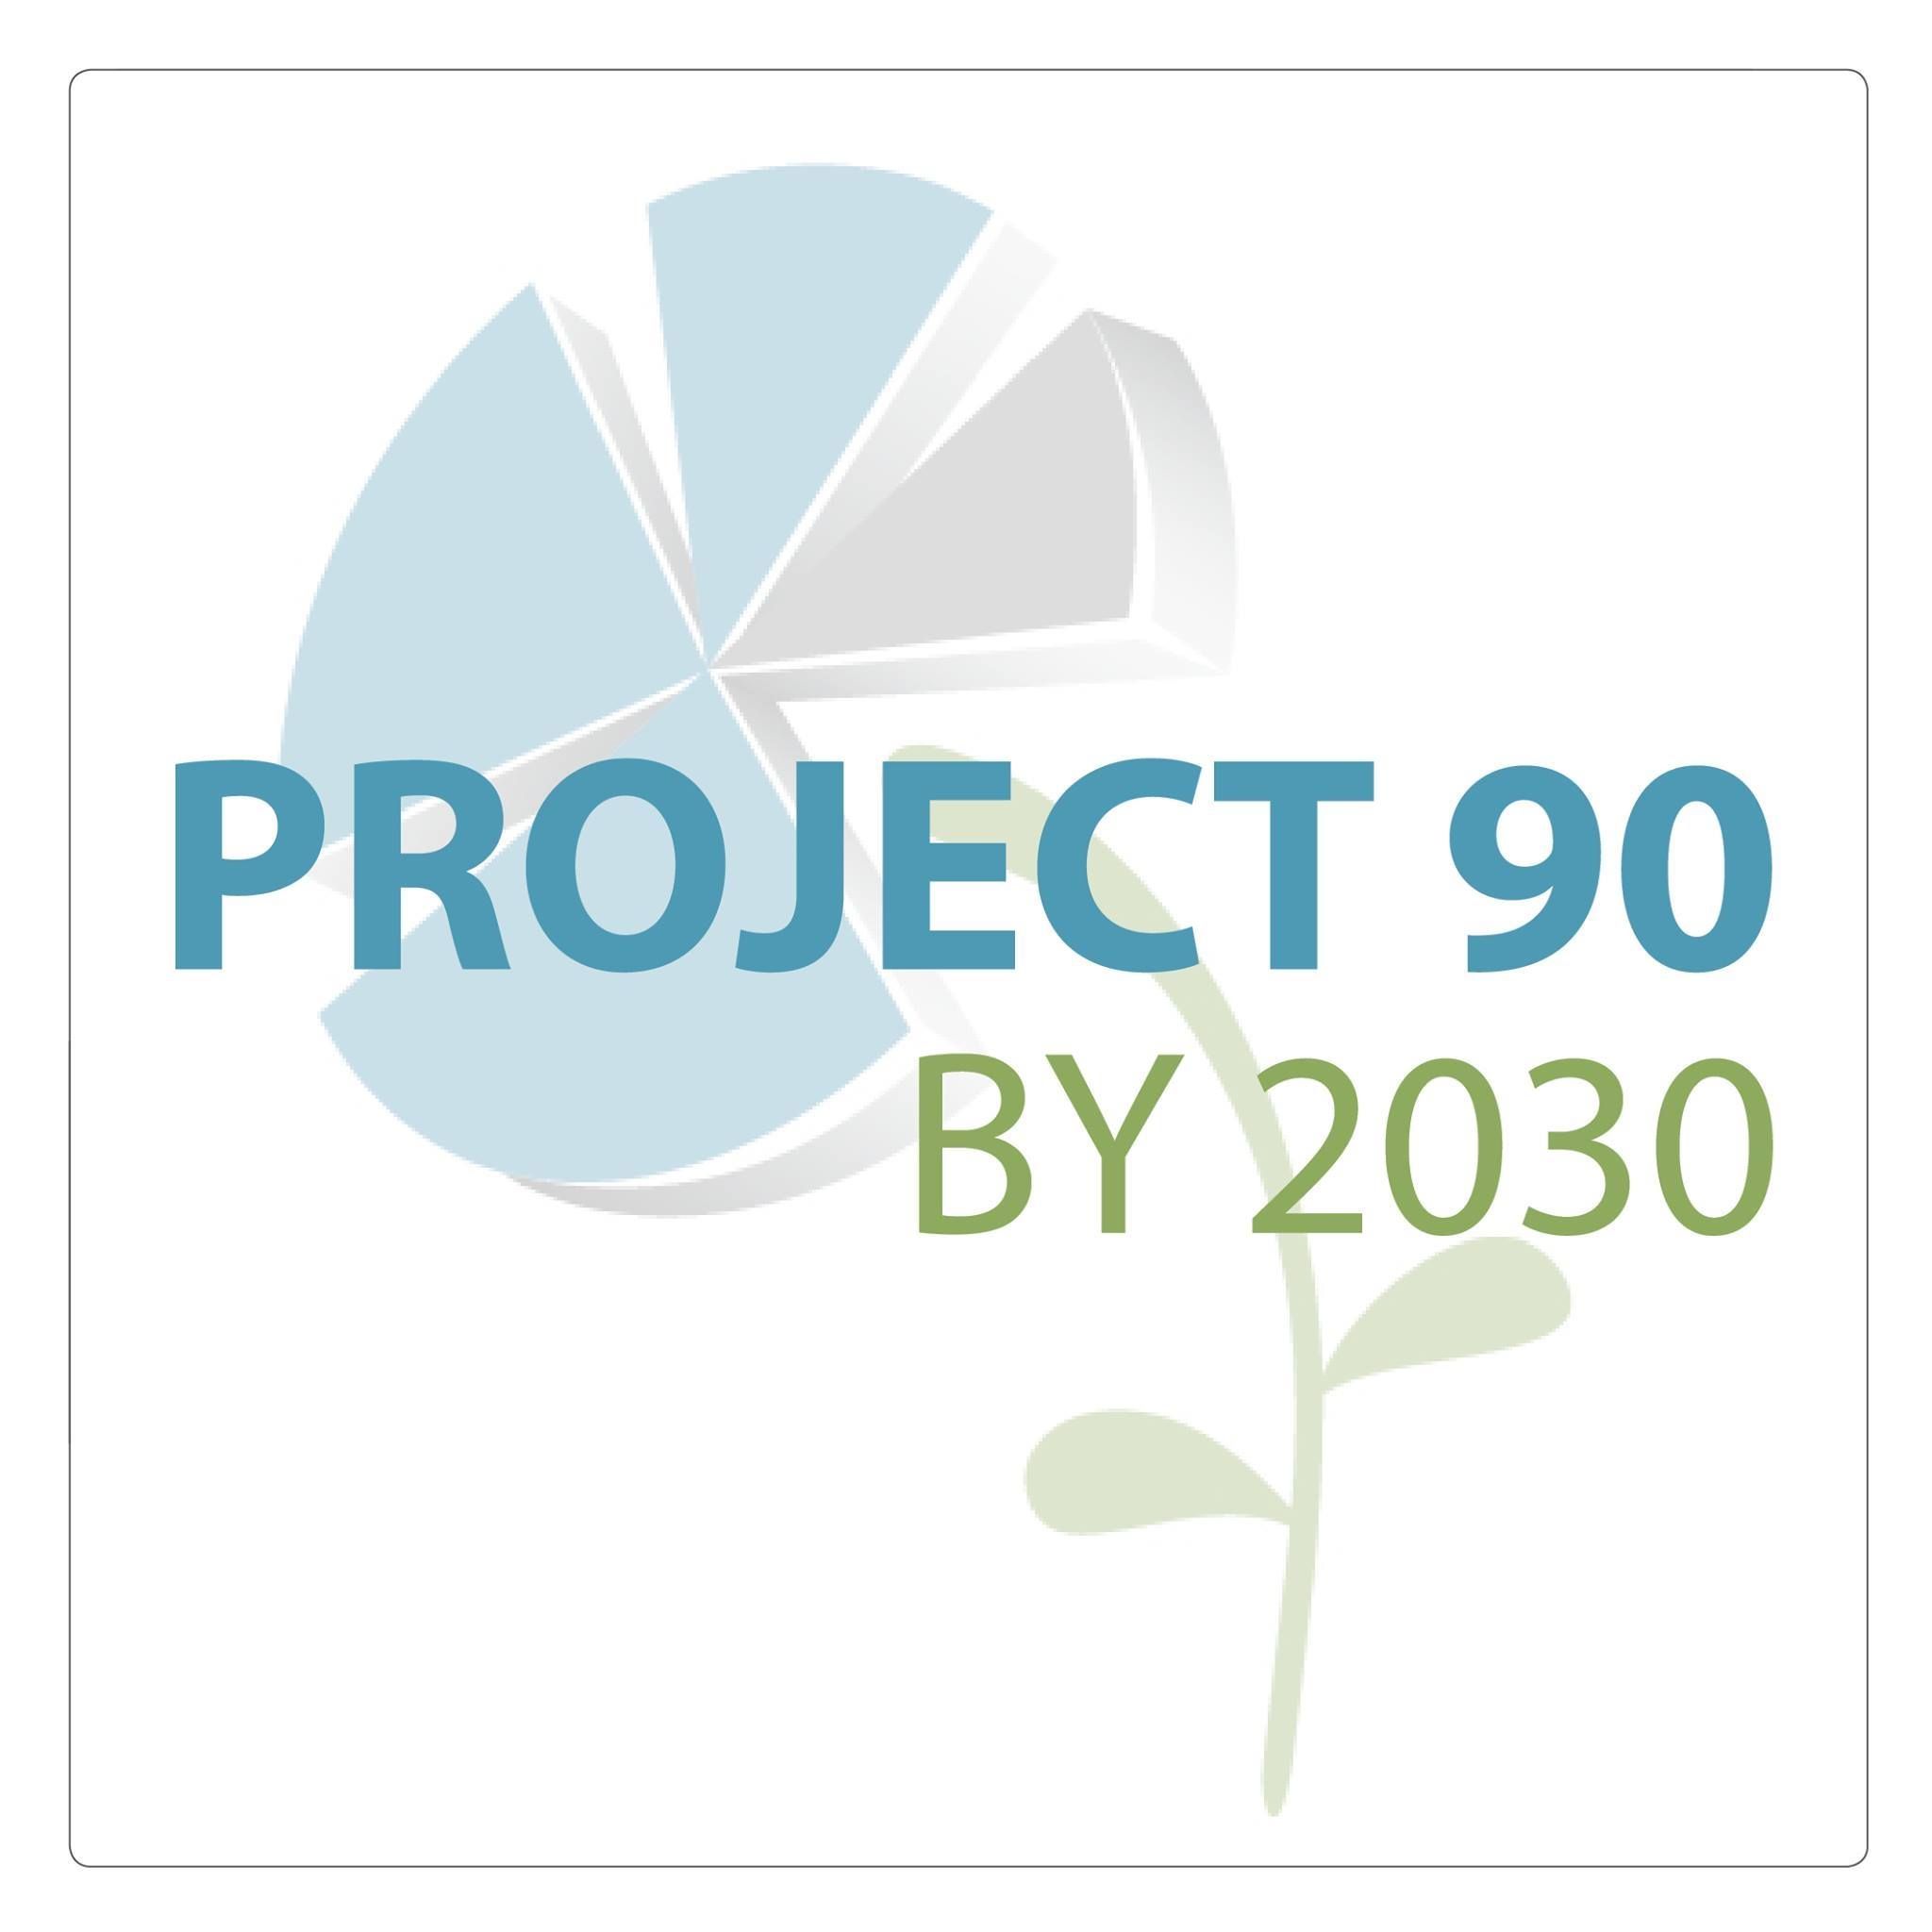 Project 90 by 2030